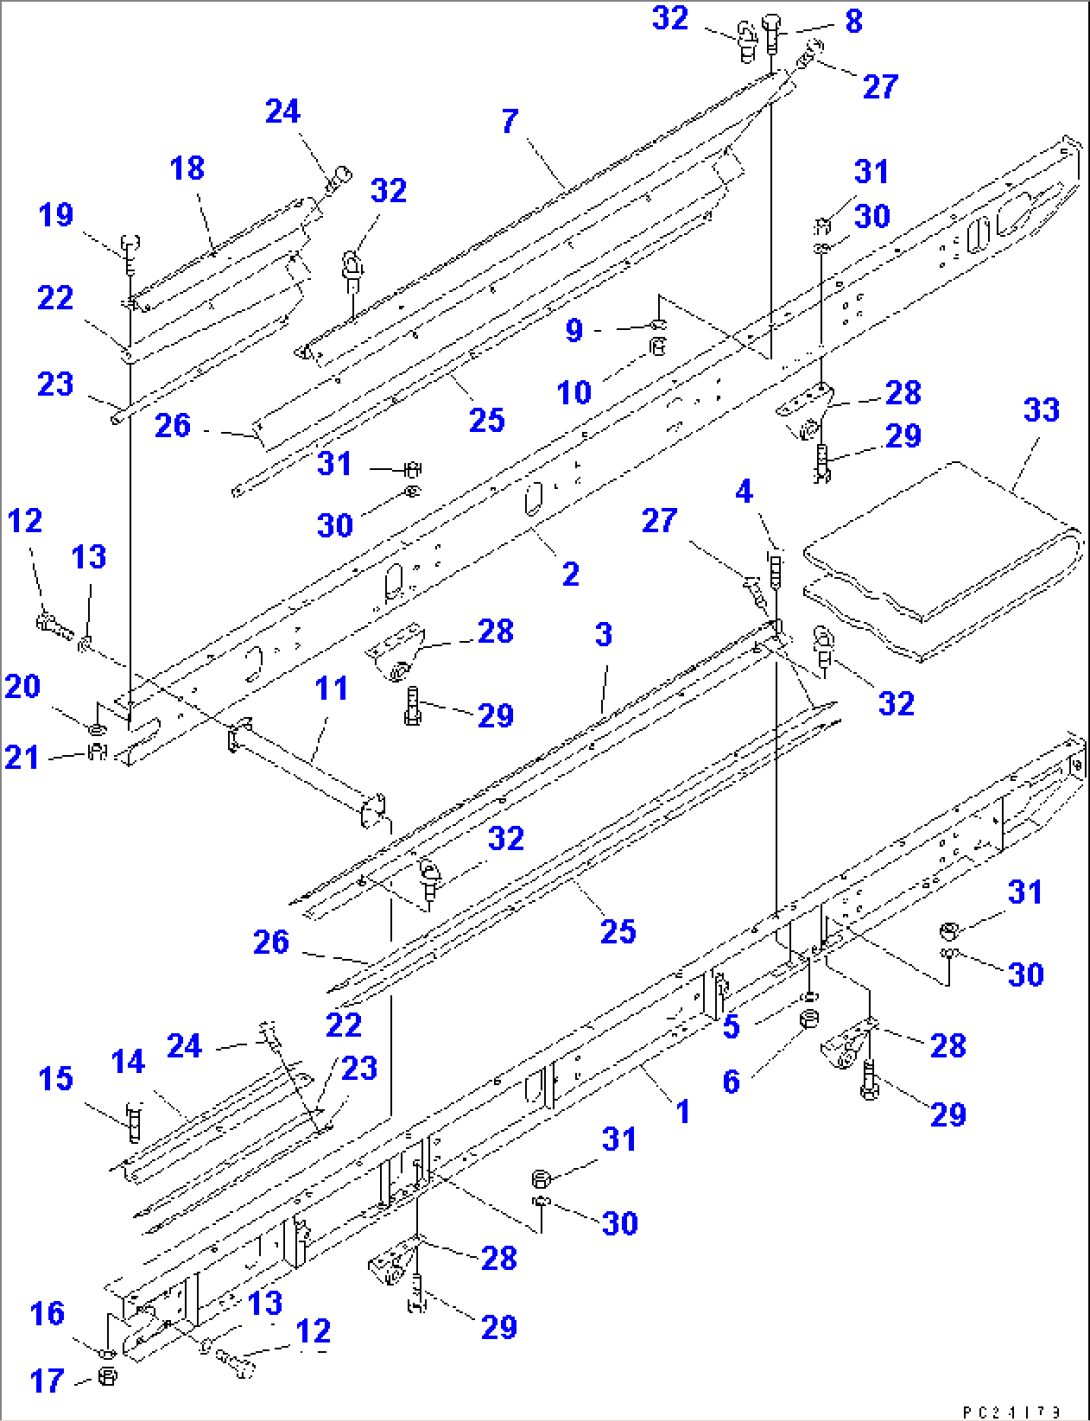 CONVEYOR (FOR DISCHARGE GRIZZLY) (1/5) (FRAME AND BELT)(#1002-1200)